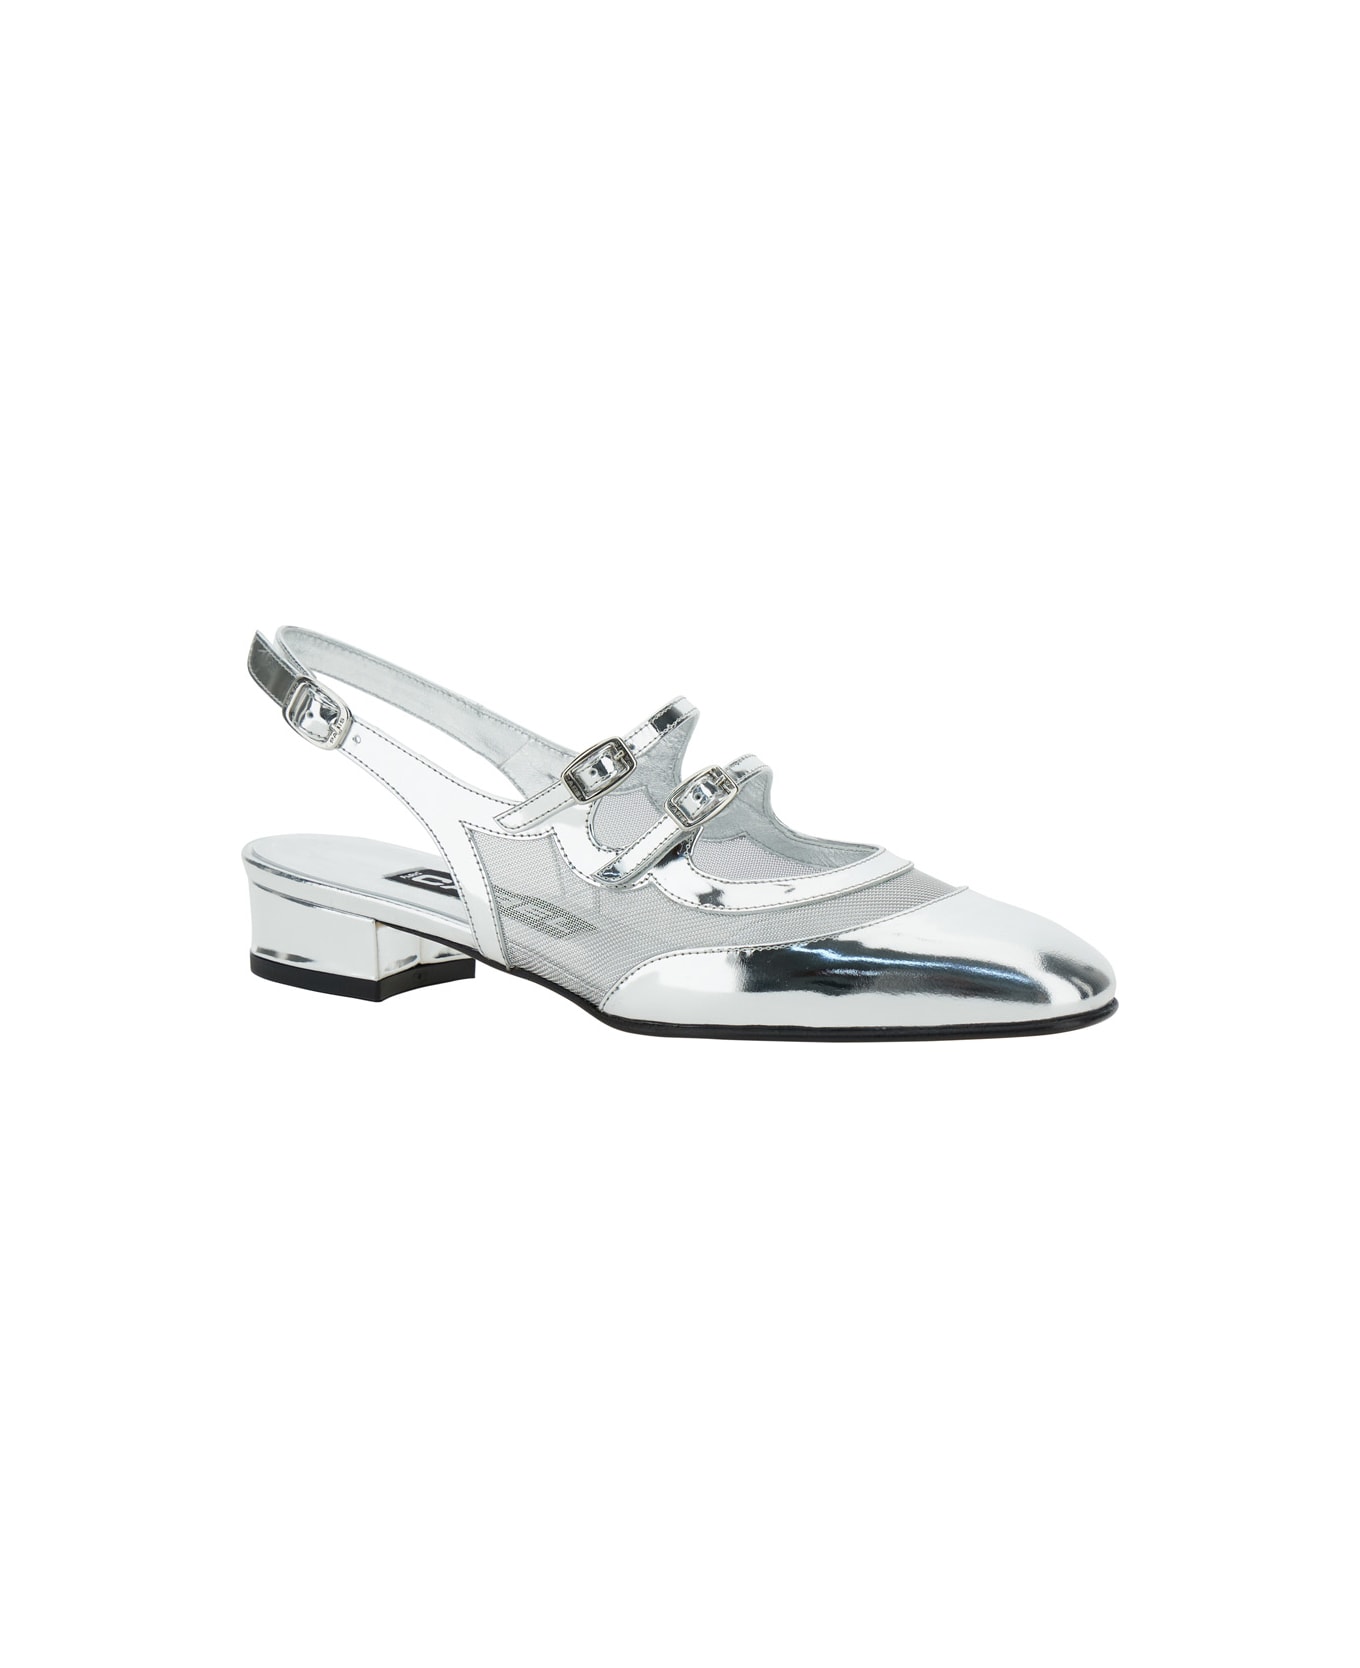 Carel Silver Mary Jane With Straps In Patent Leather Woman - Metallic